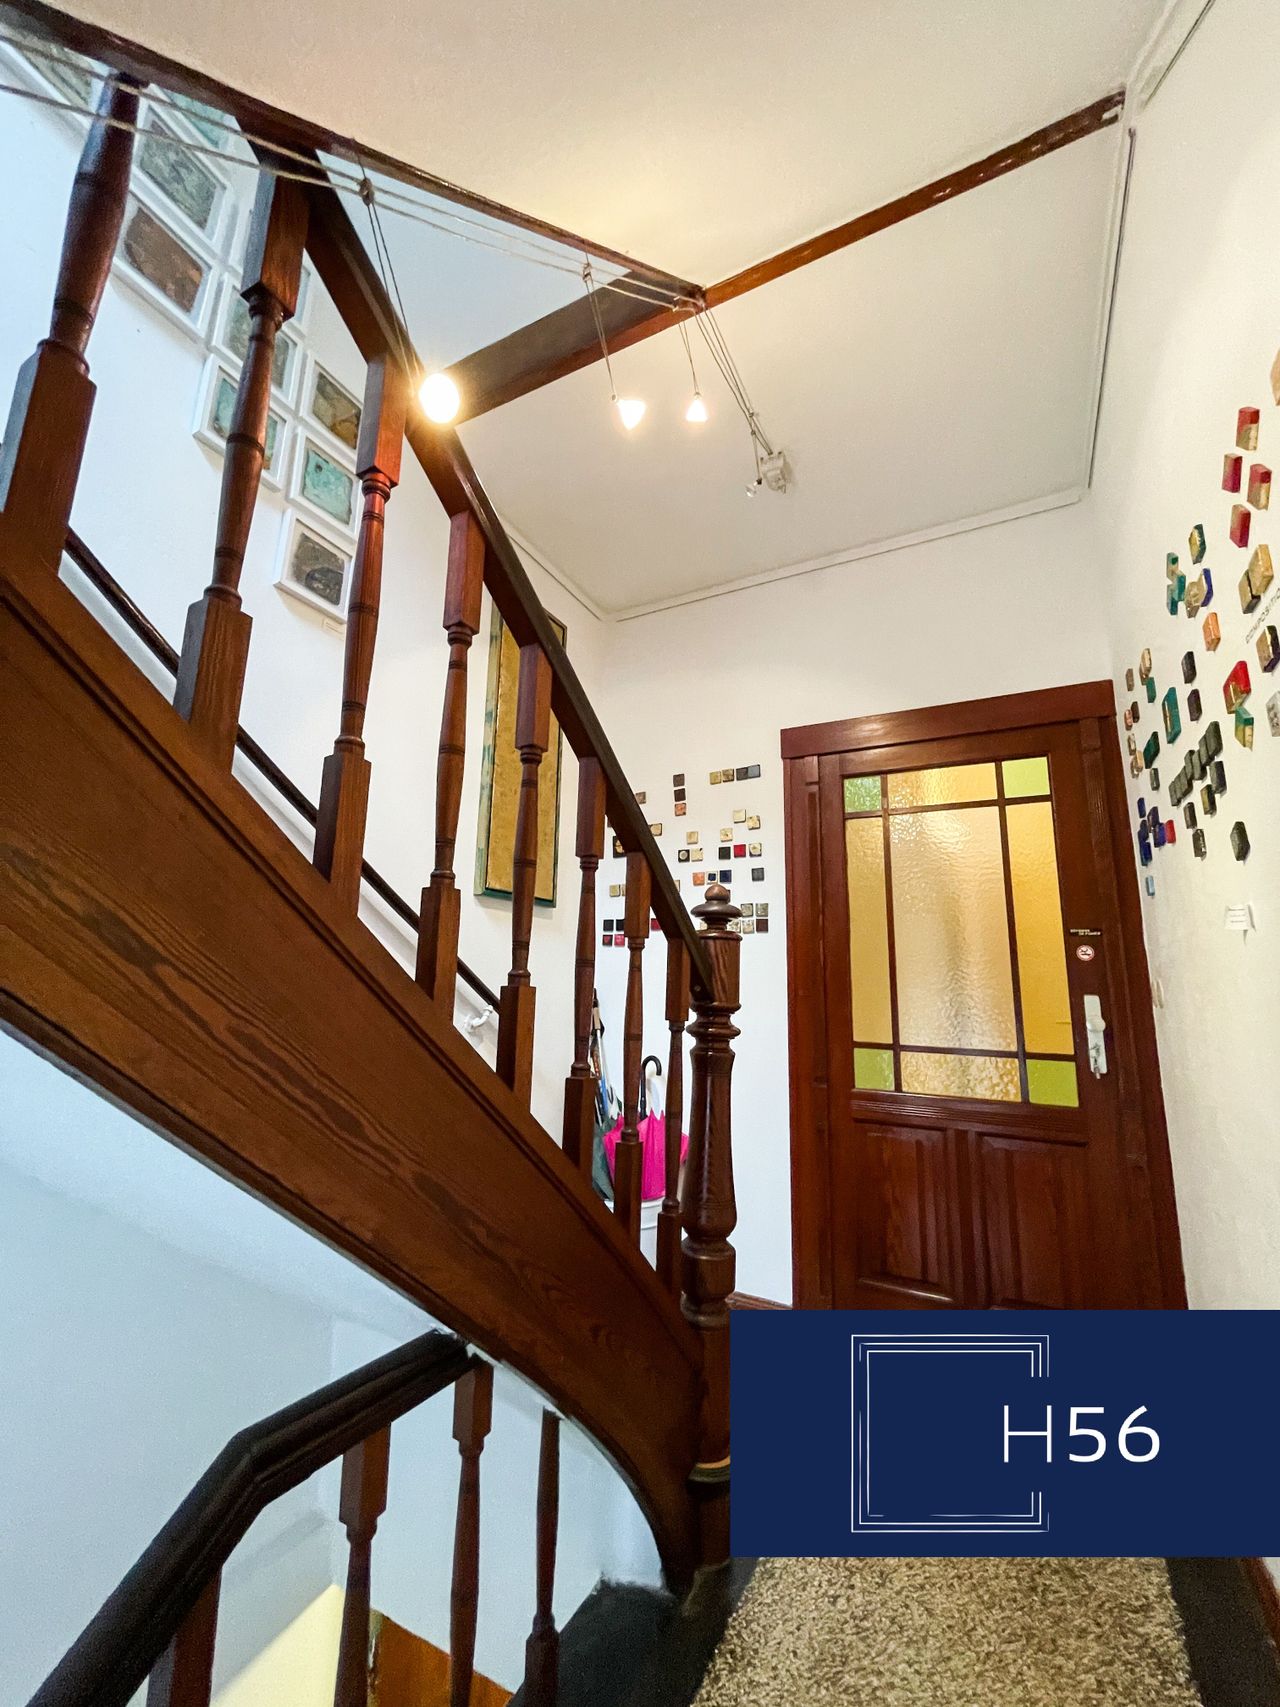 Perfect apartment for students & young people in an old Bremen house